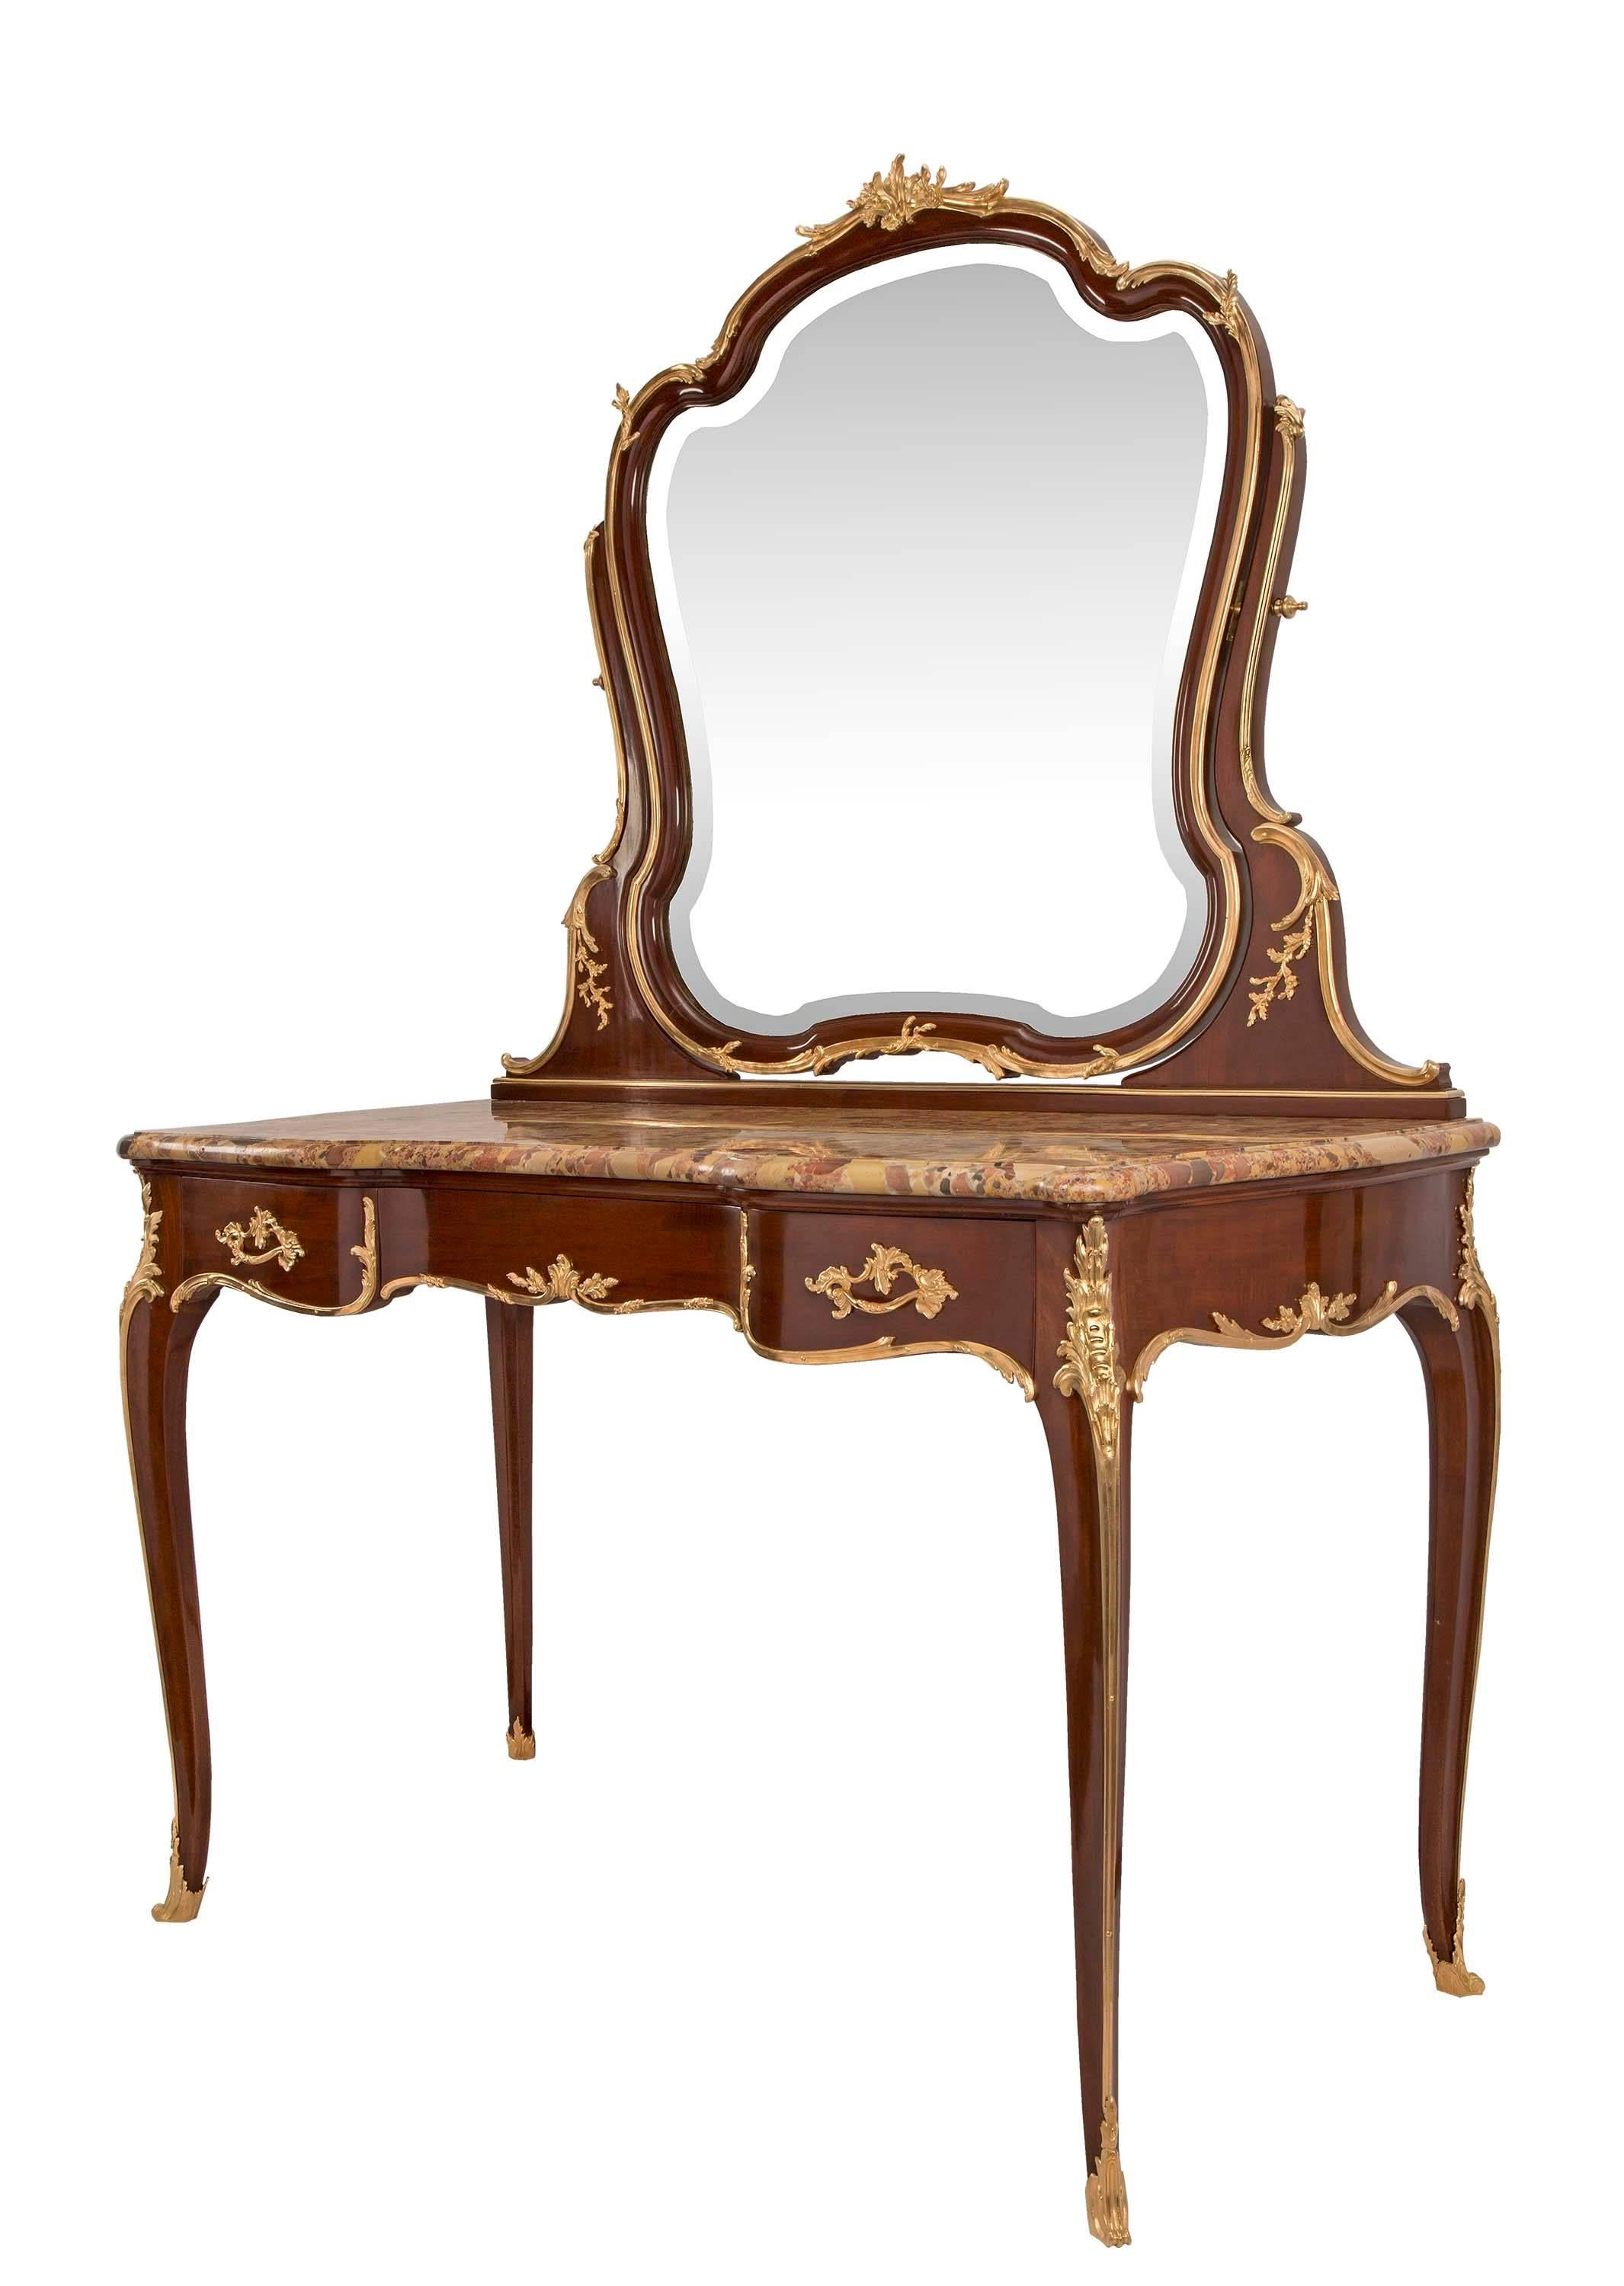 A magnificent and very high quality French 19th century Louis XV style mahogany and ormolu vanity, signed F. Linke. Raised on elegant cabriole legs with ormolu wraparound sabots and chutes continuing up to large acanthus leaf ormolu top mounts. At